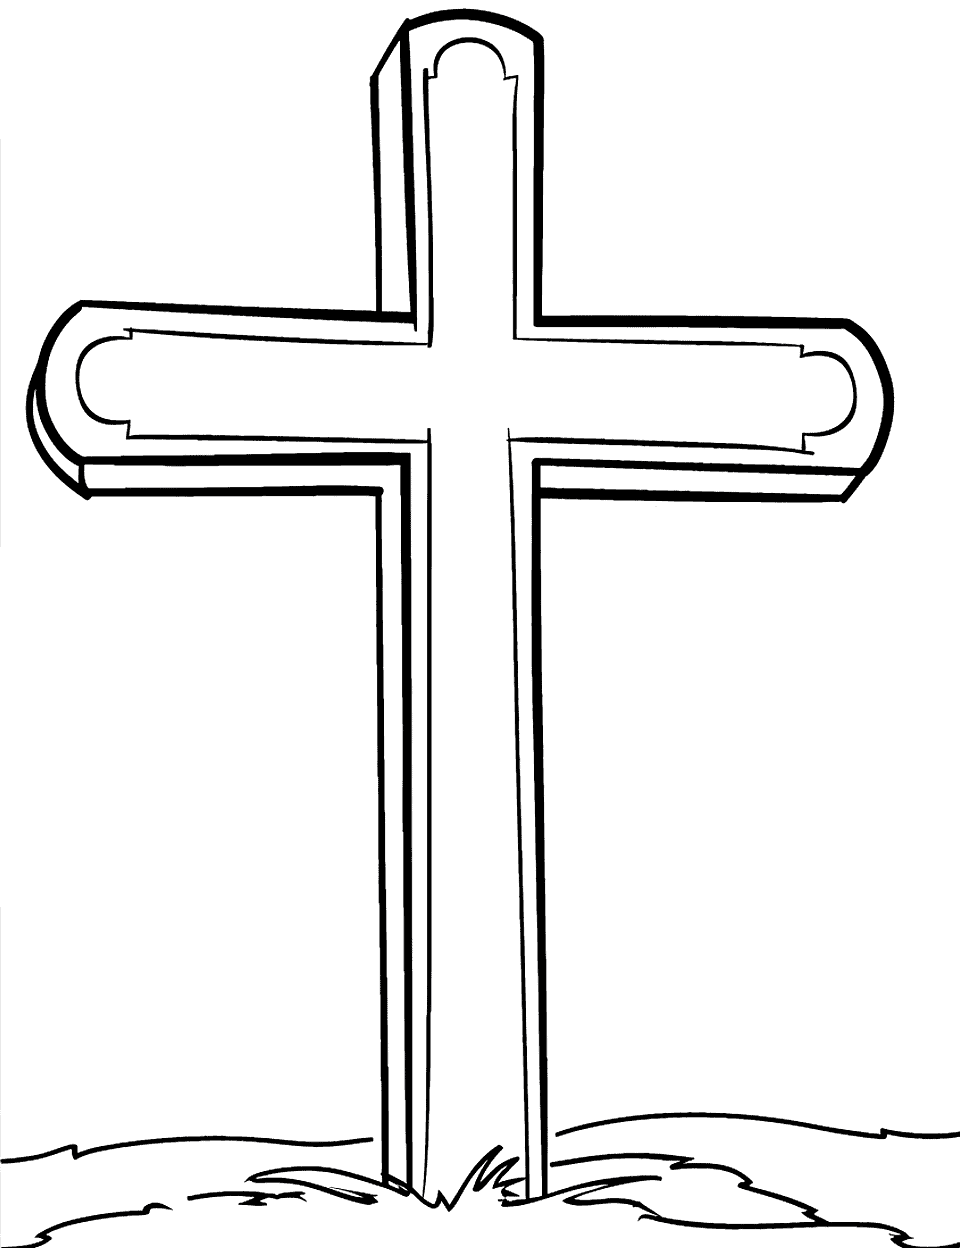 Simple Cross Outline Coloring Page - A basic outline of a cross, providing ample space for creative coloring.